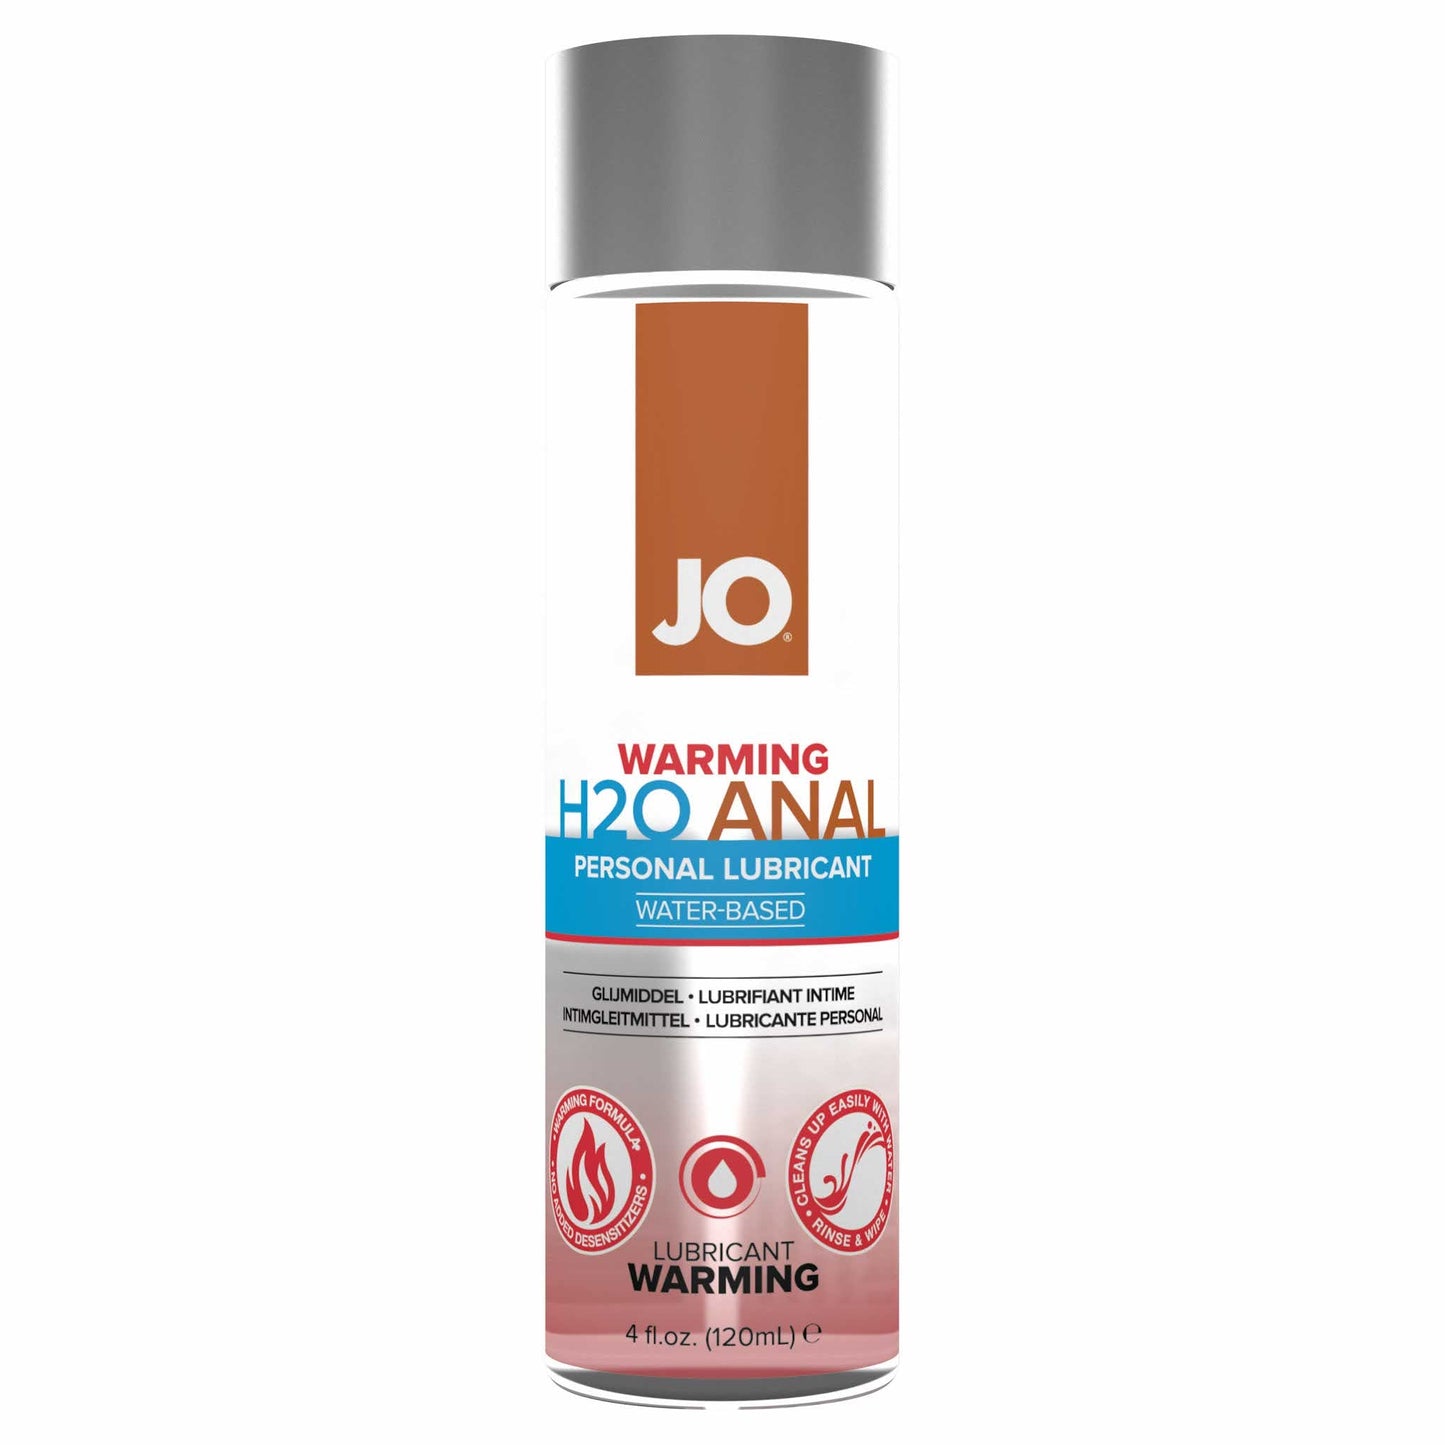 front view of the jo h2o anal water-based personal lubricant warming 4oz